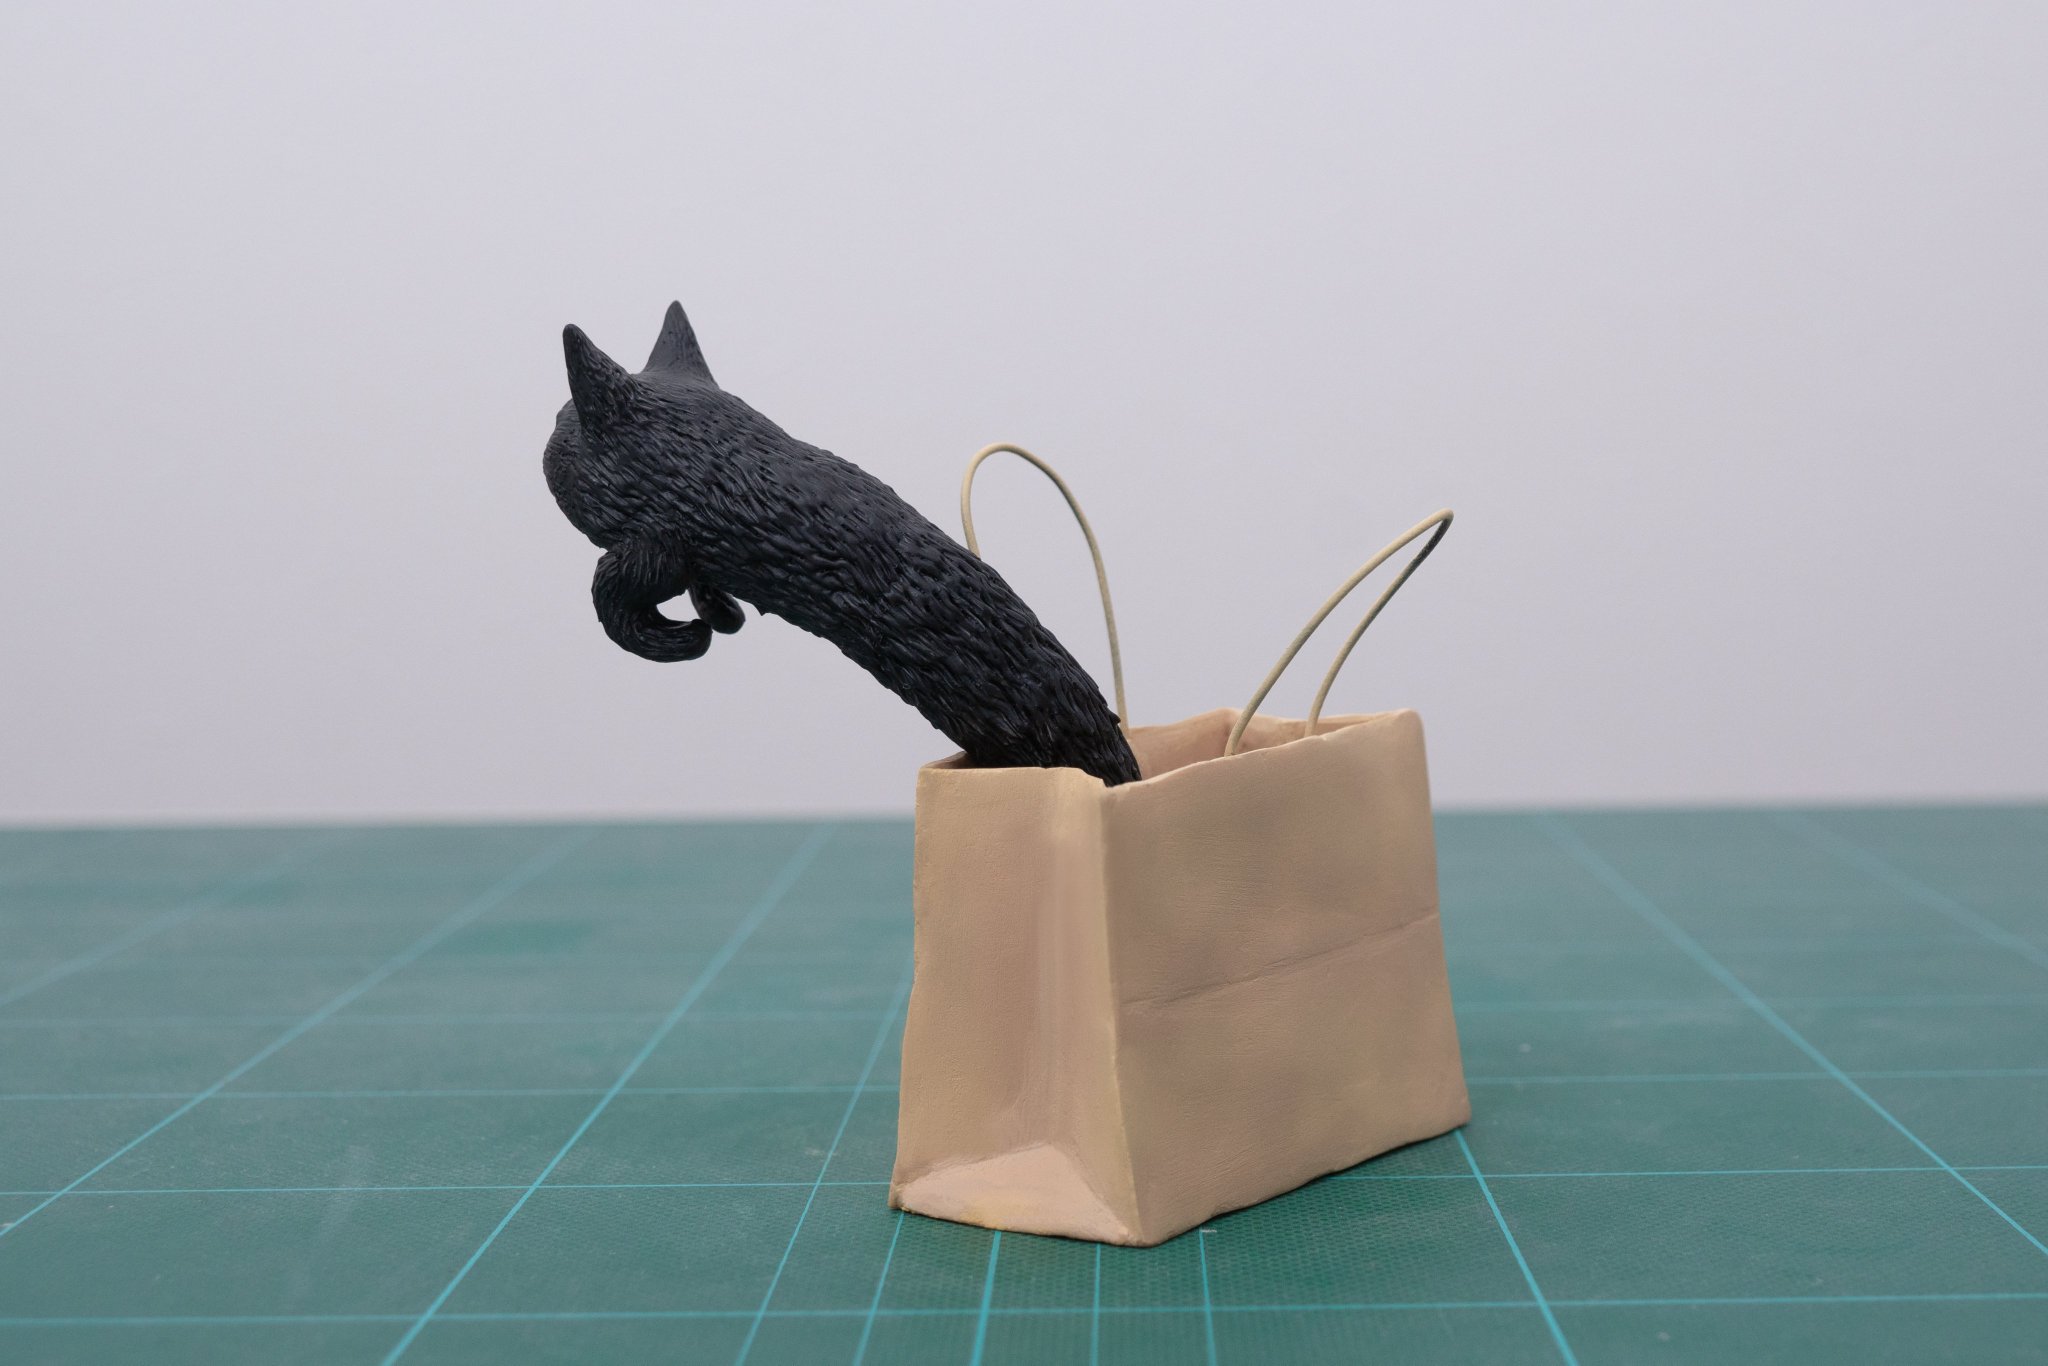 A New Man Who Makes Petty Animal Figures